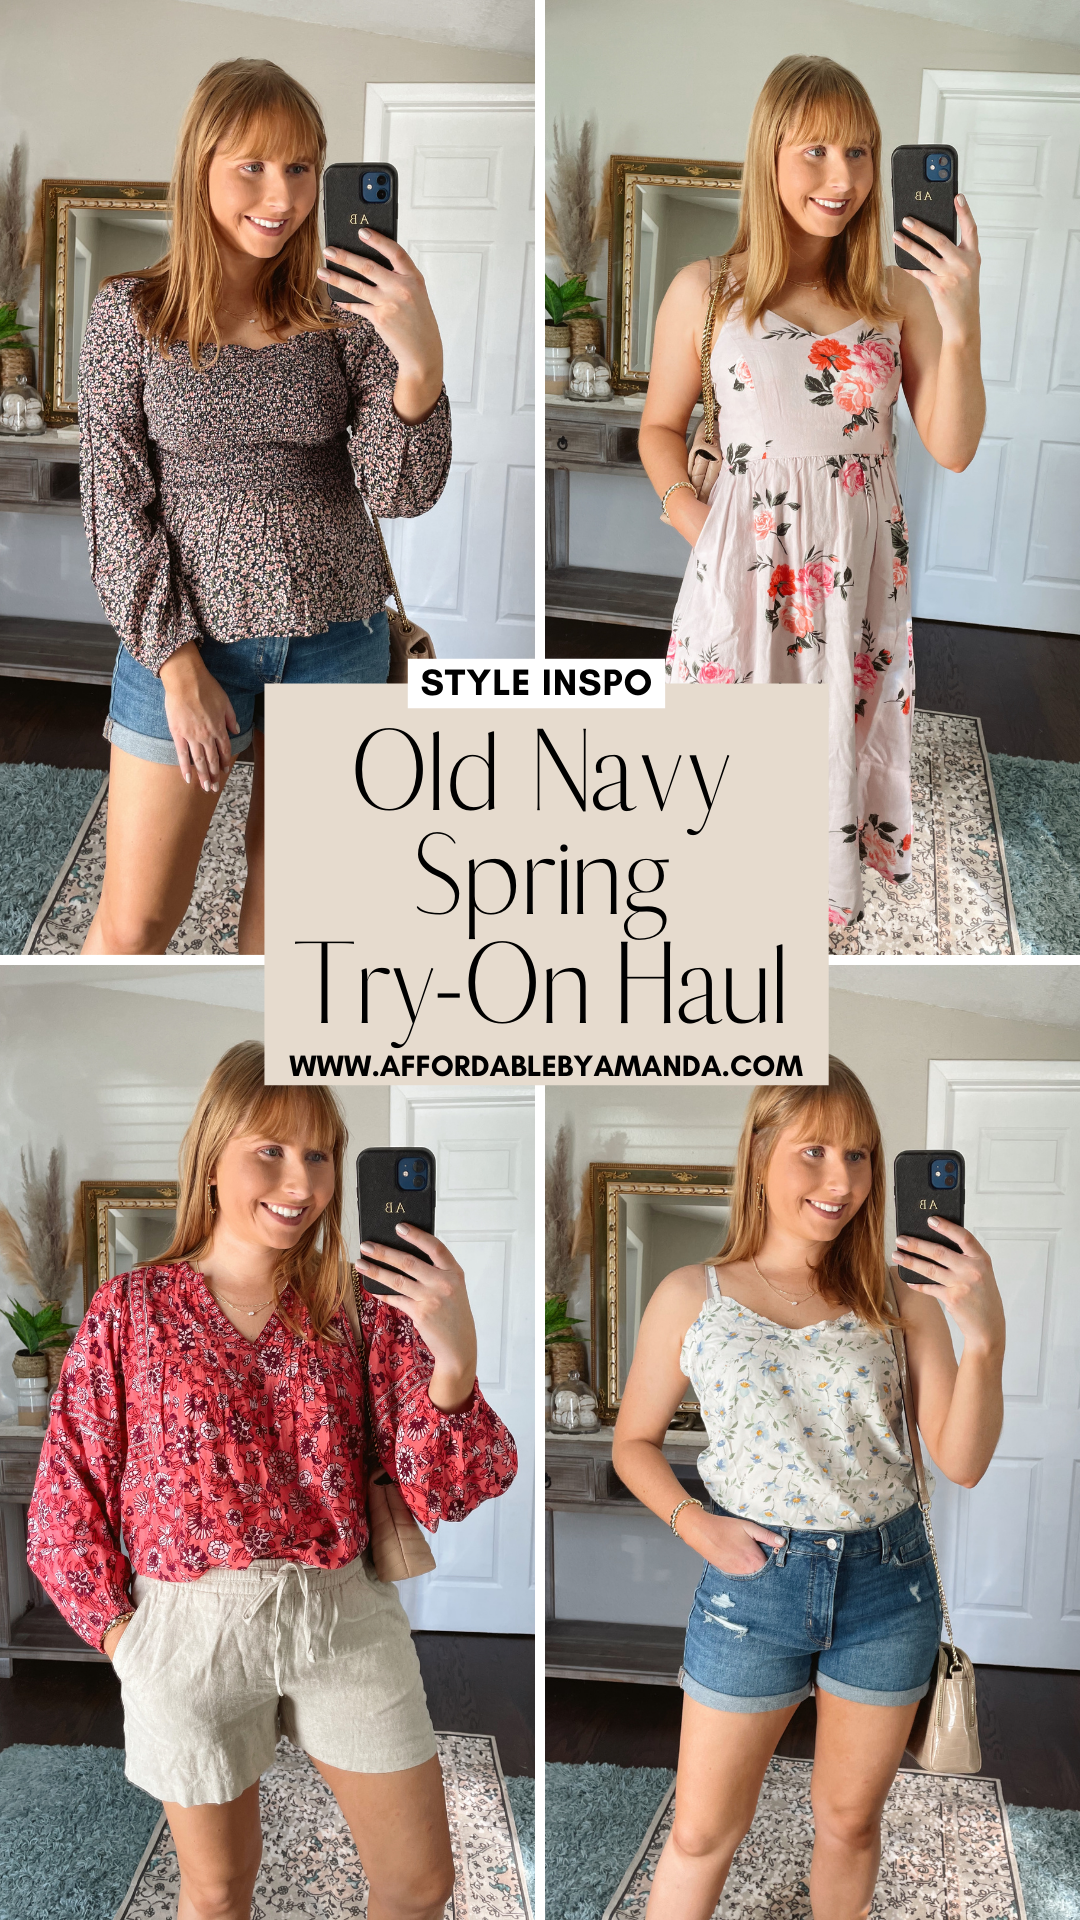 old navy tunic sweater - By Lauren M